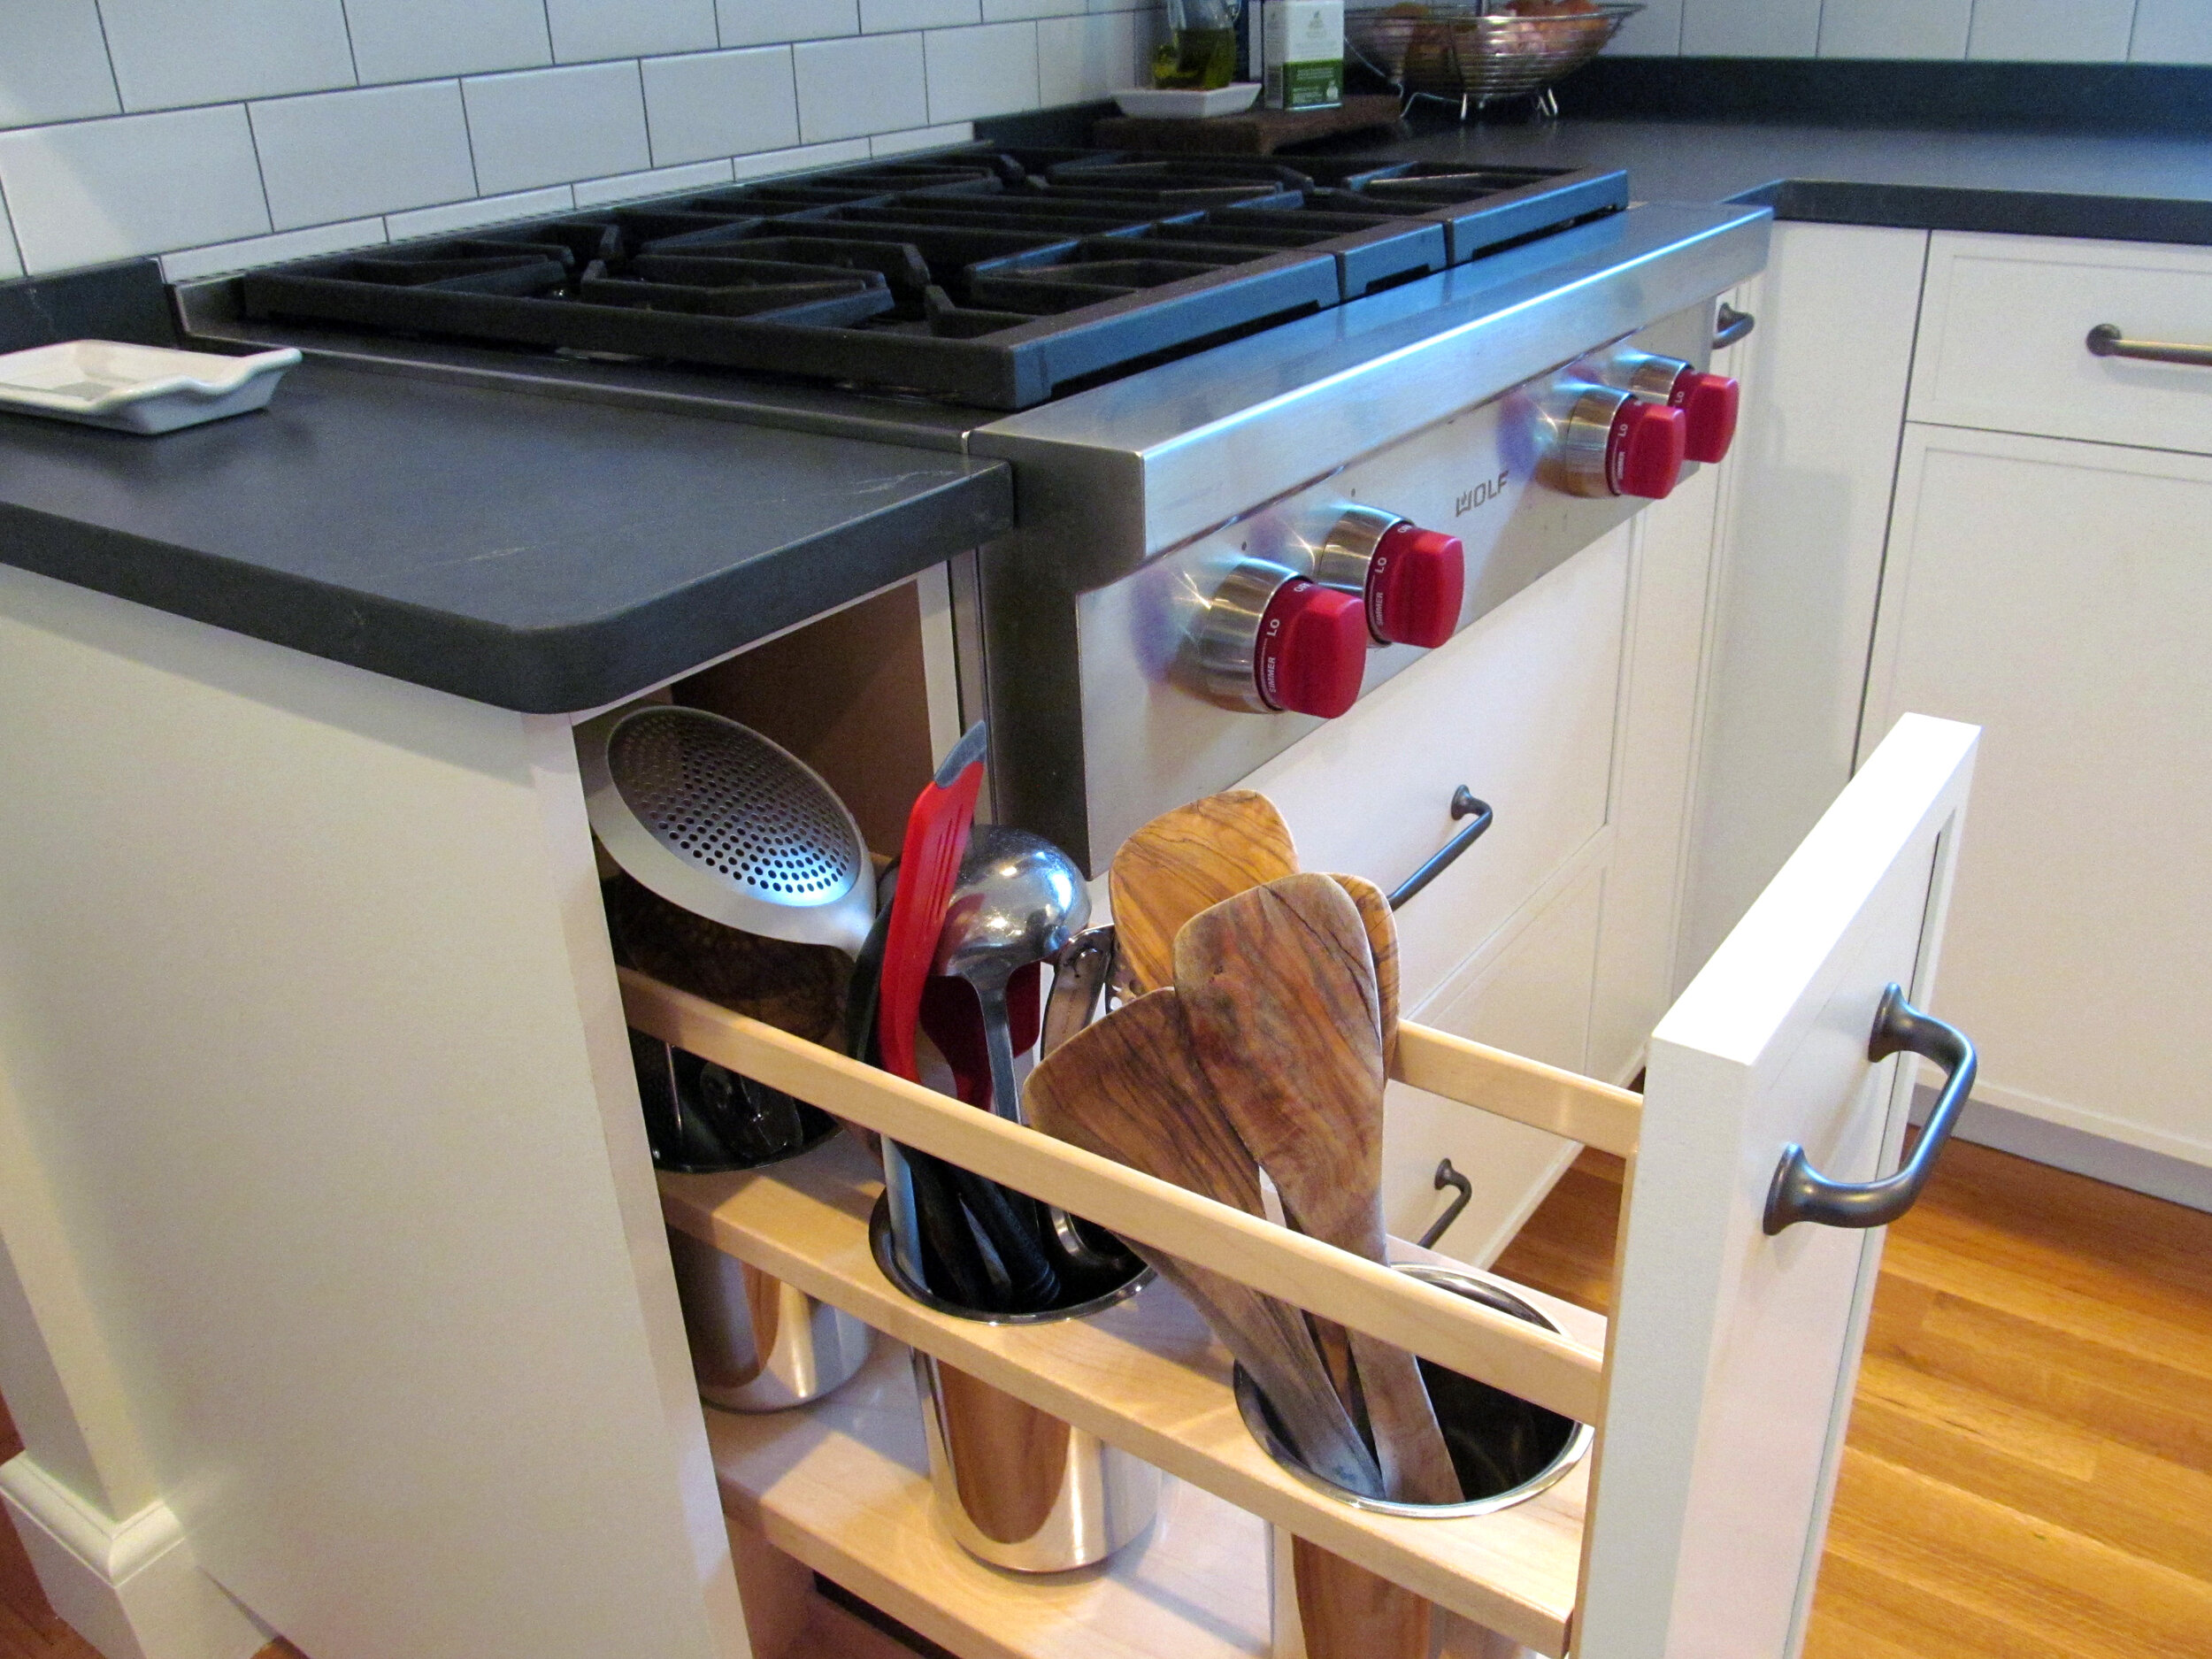 Stainless steel canister base pullout next to the range keeps utensils close at hand.